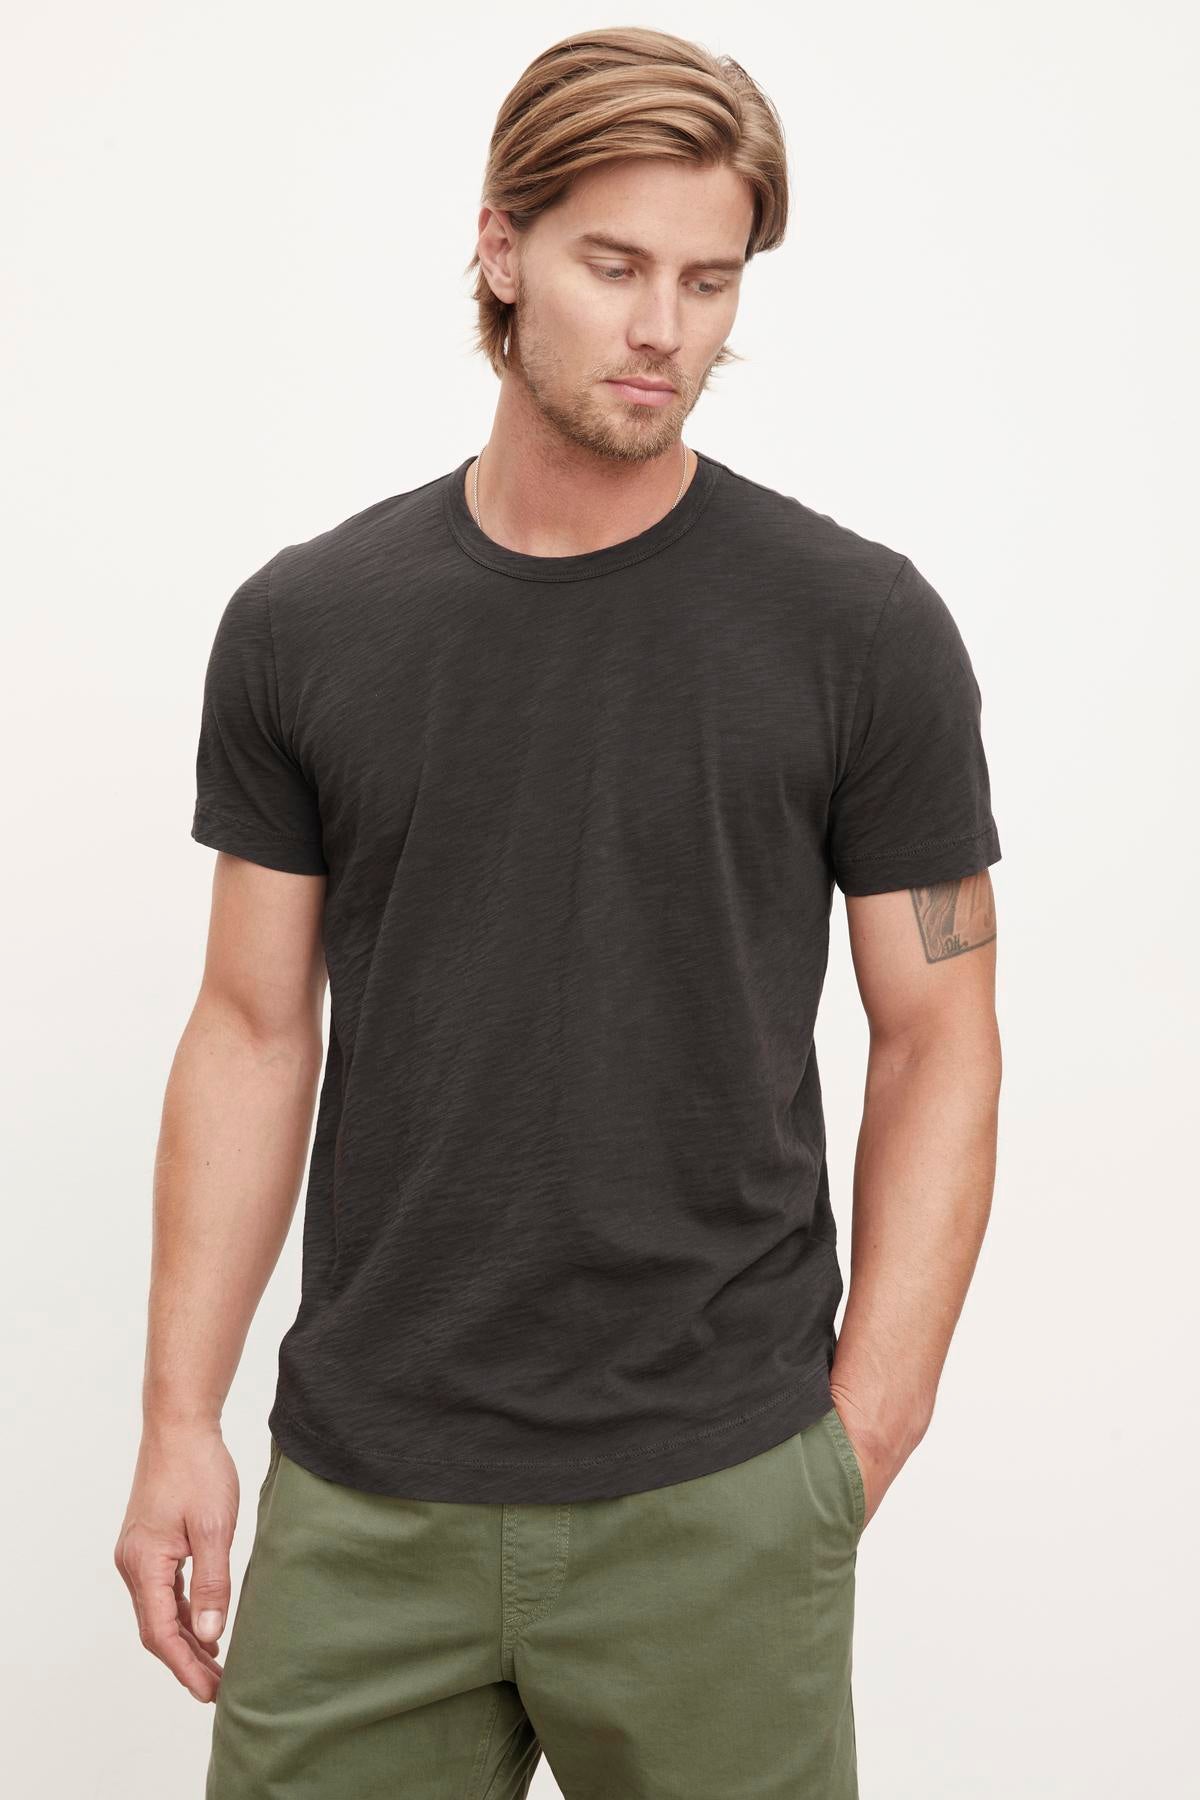   A man with blond hair wearing a Velvet by Graham & Spencer AMARO TEE and olive green pants, standing against a plain background. 